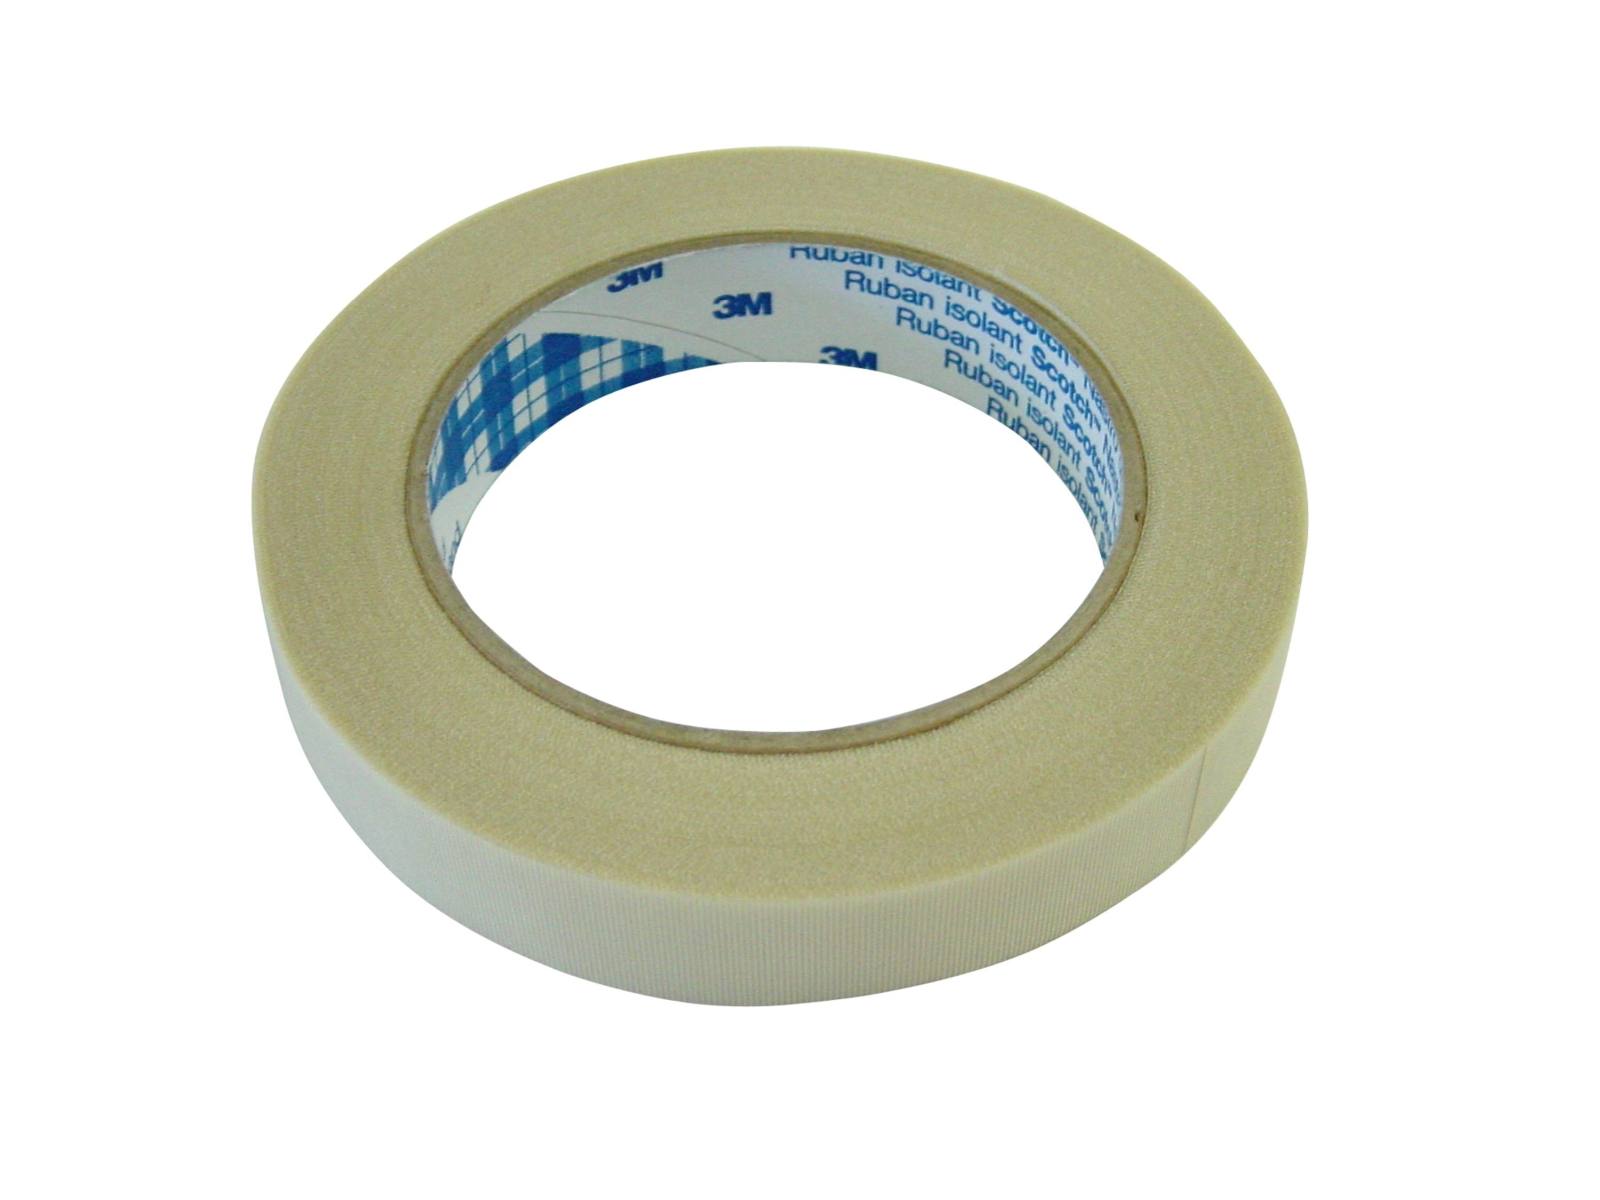 3M ET 69 Glasweefselband, wit, 6 mm x 33 m x 0,18 mm